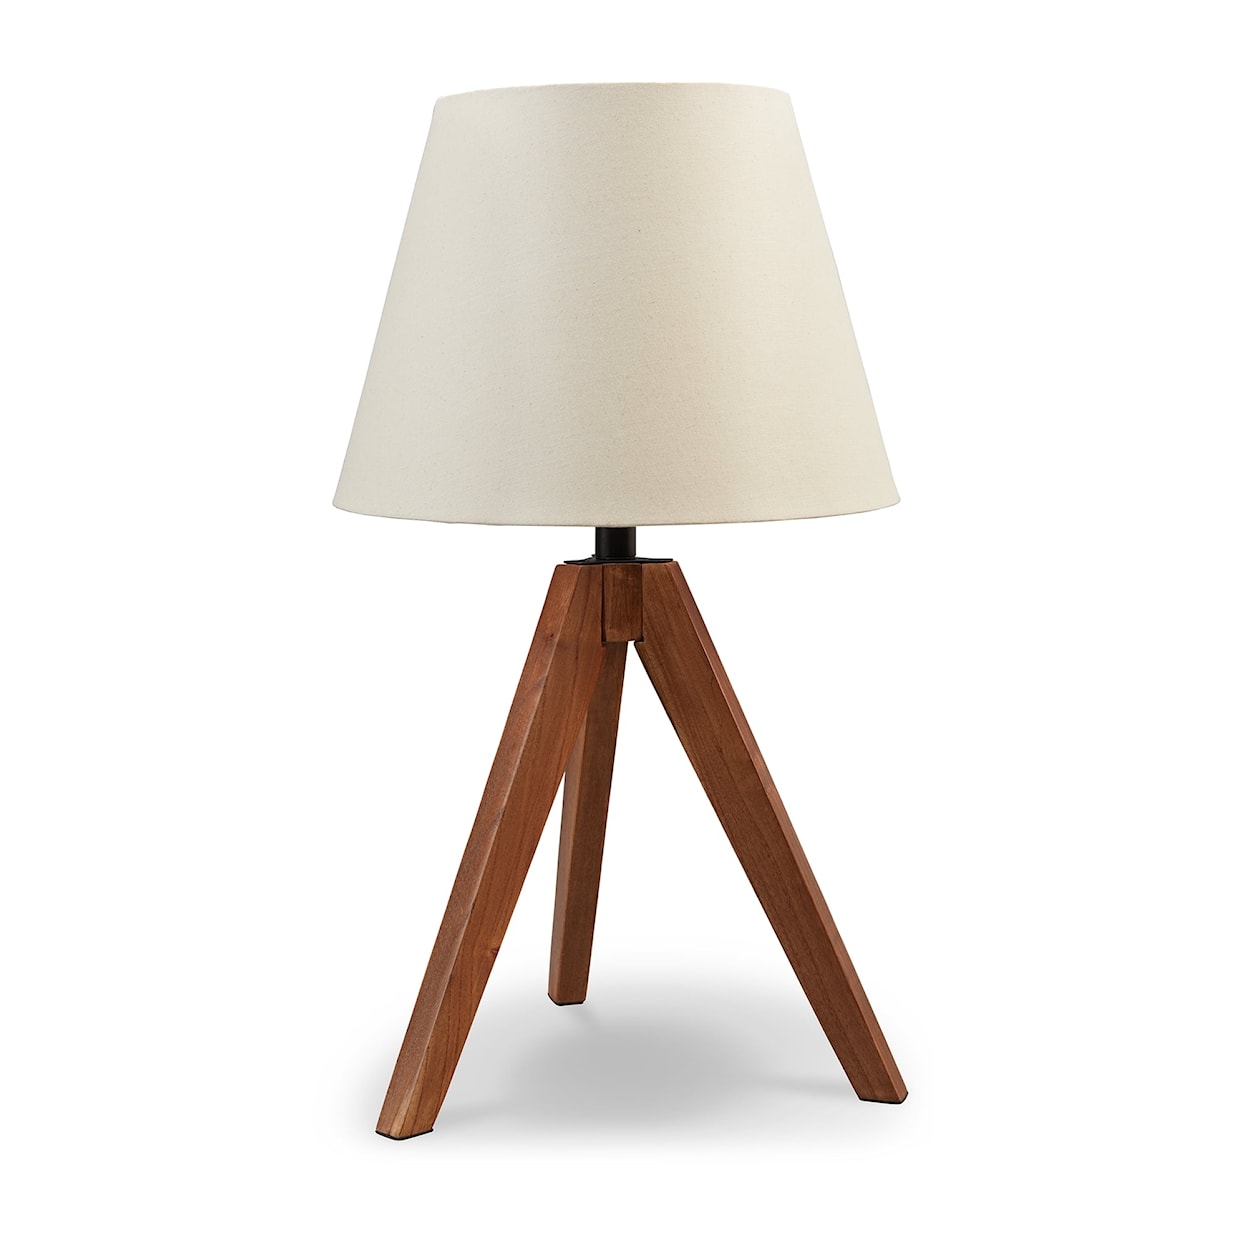 Ashley Furniture Signature Design Laifland Wood Table Lamp (Set of 2)